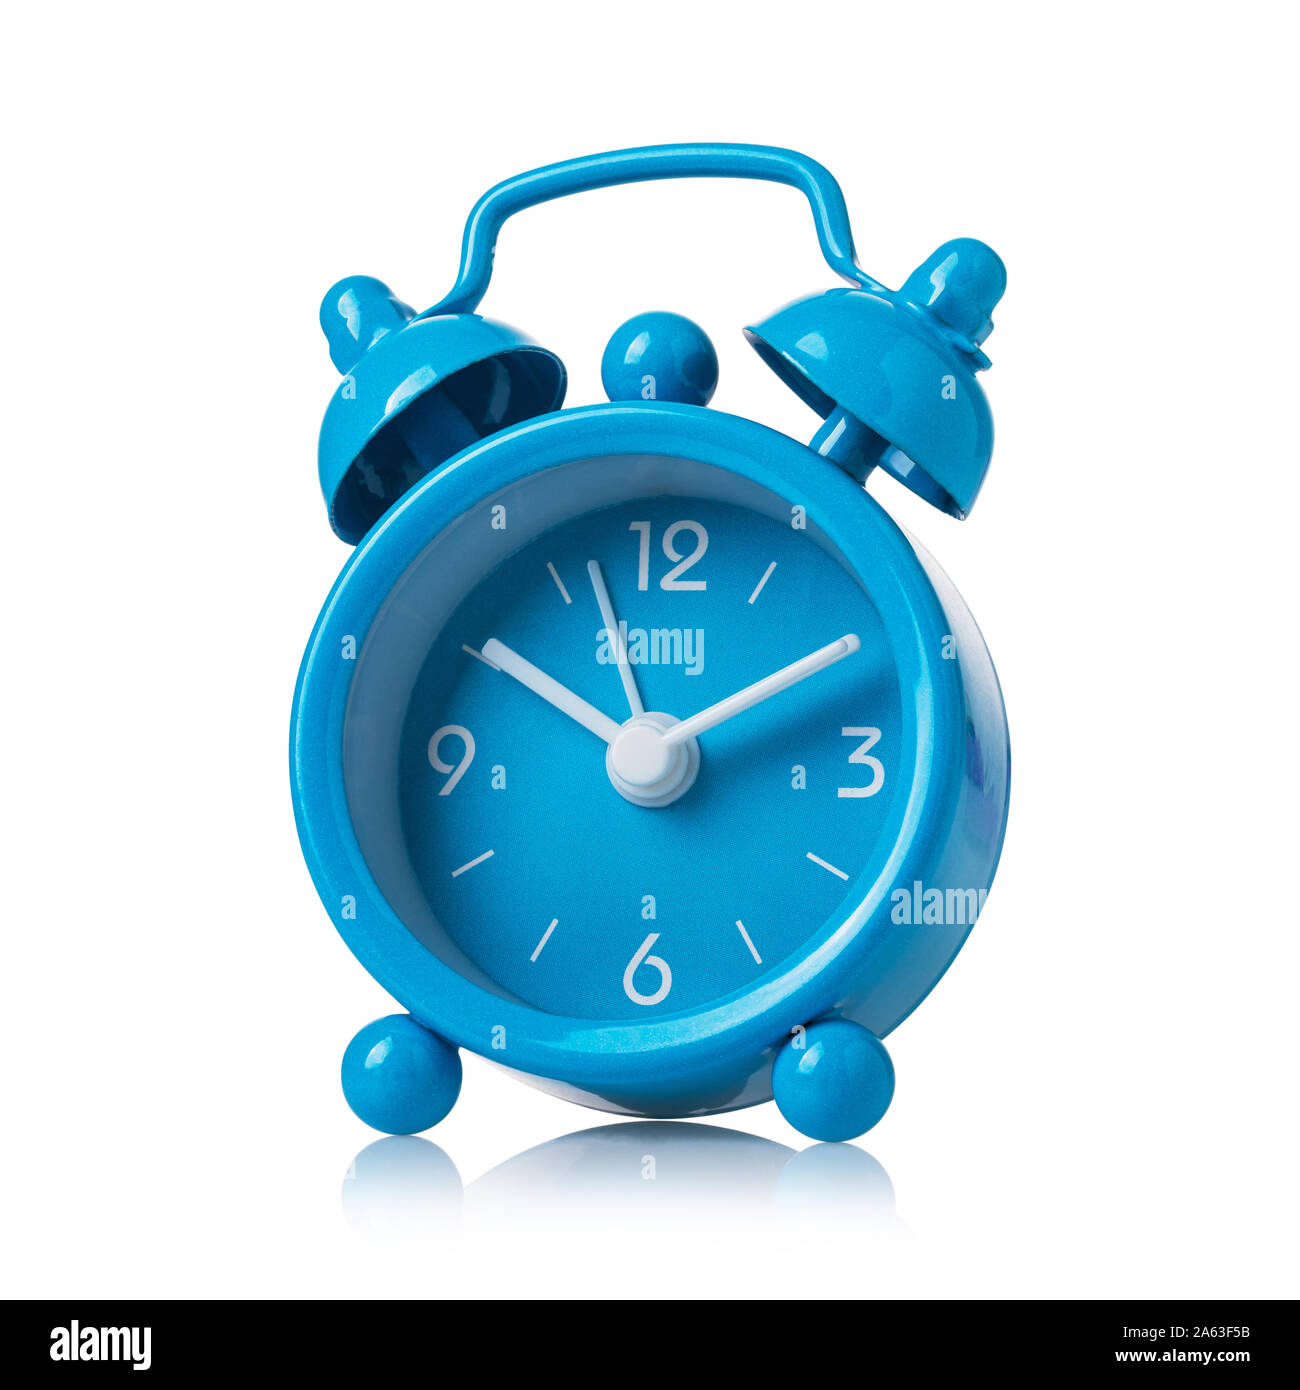 Alarm clock in blue isolated on white background Stock Photo